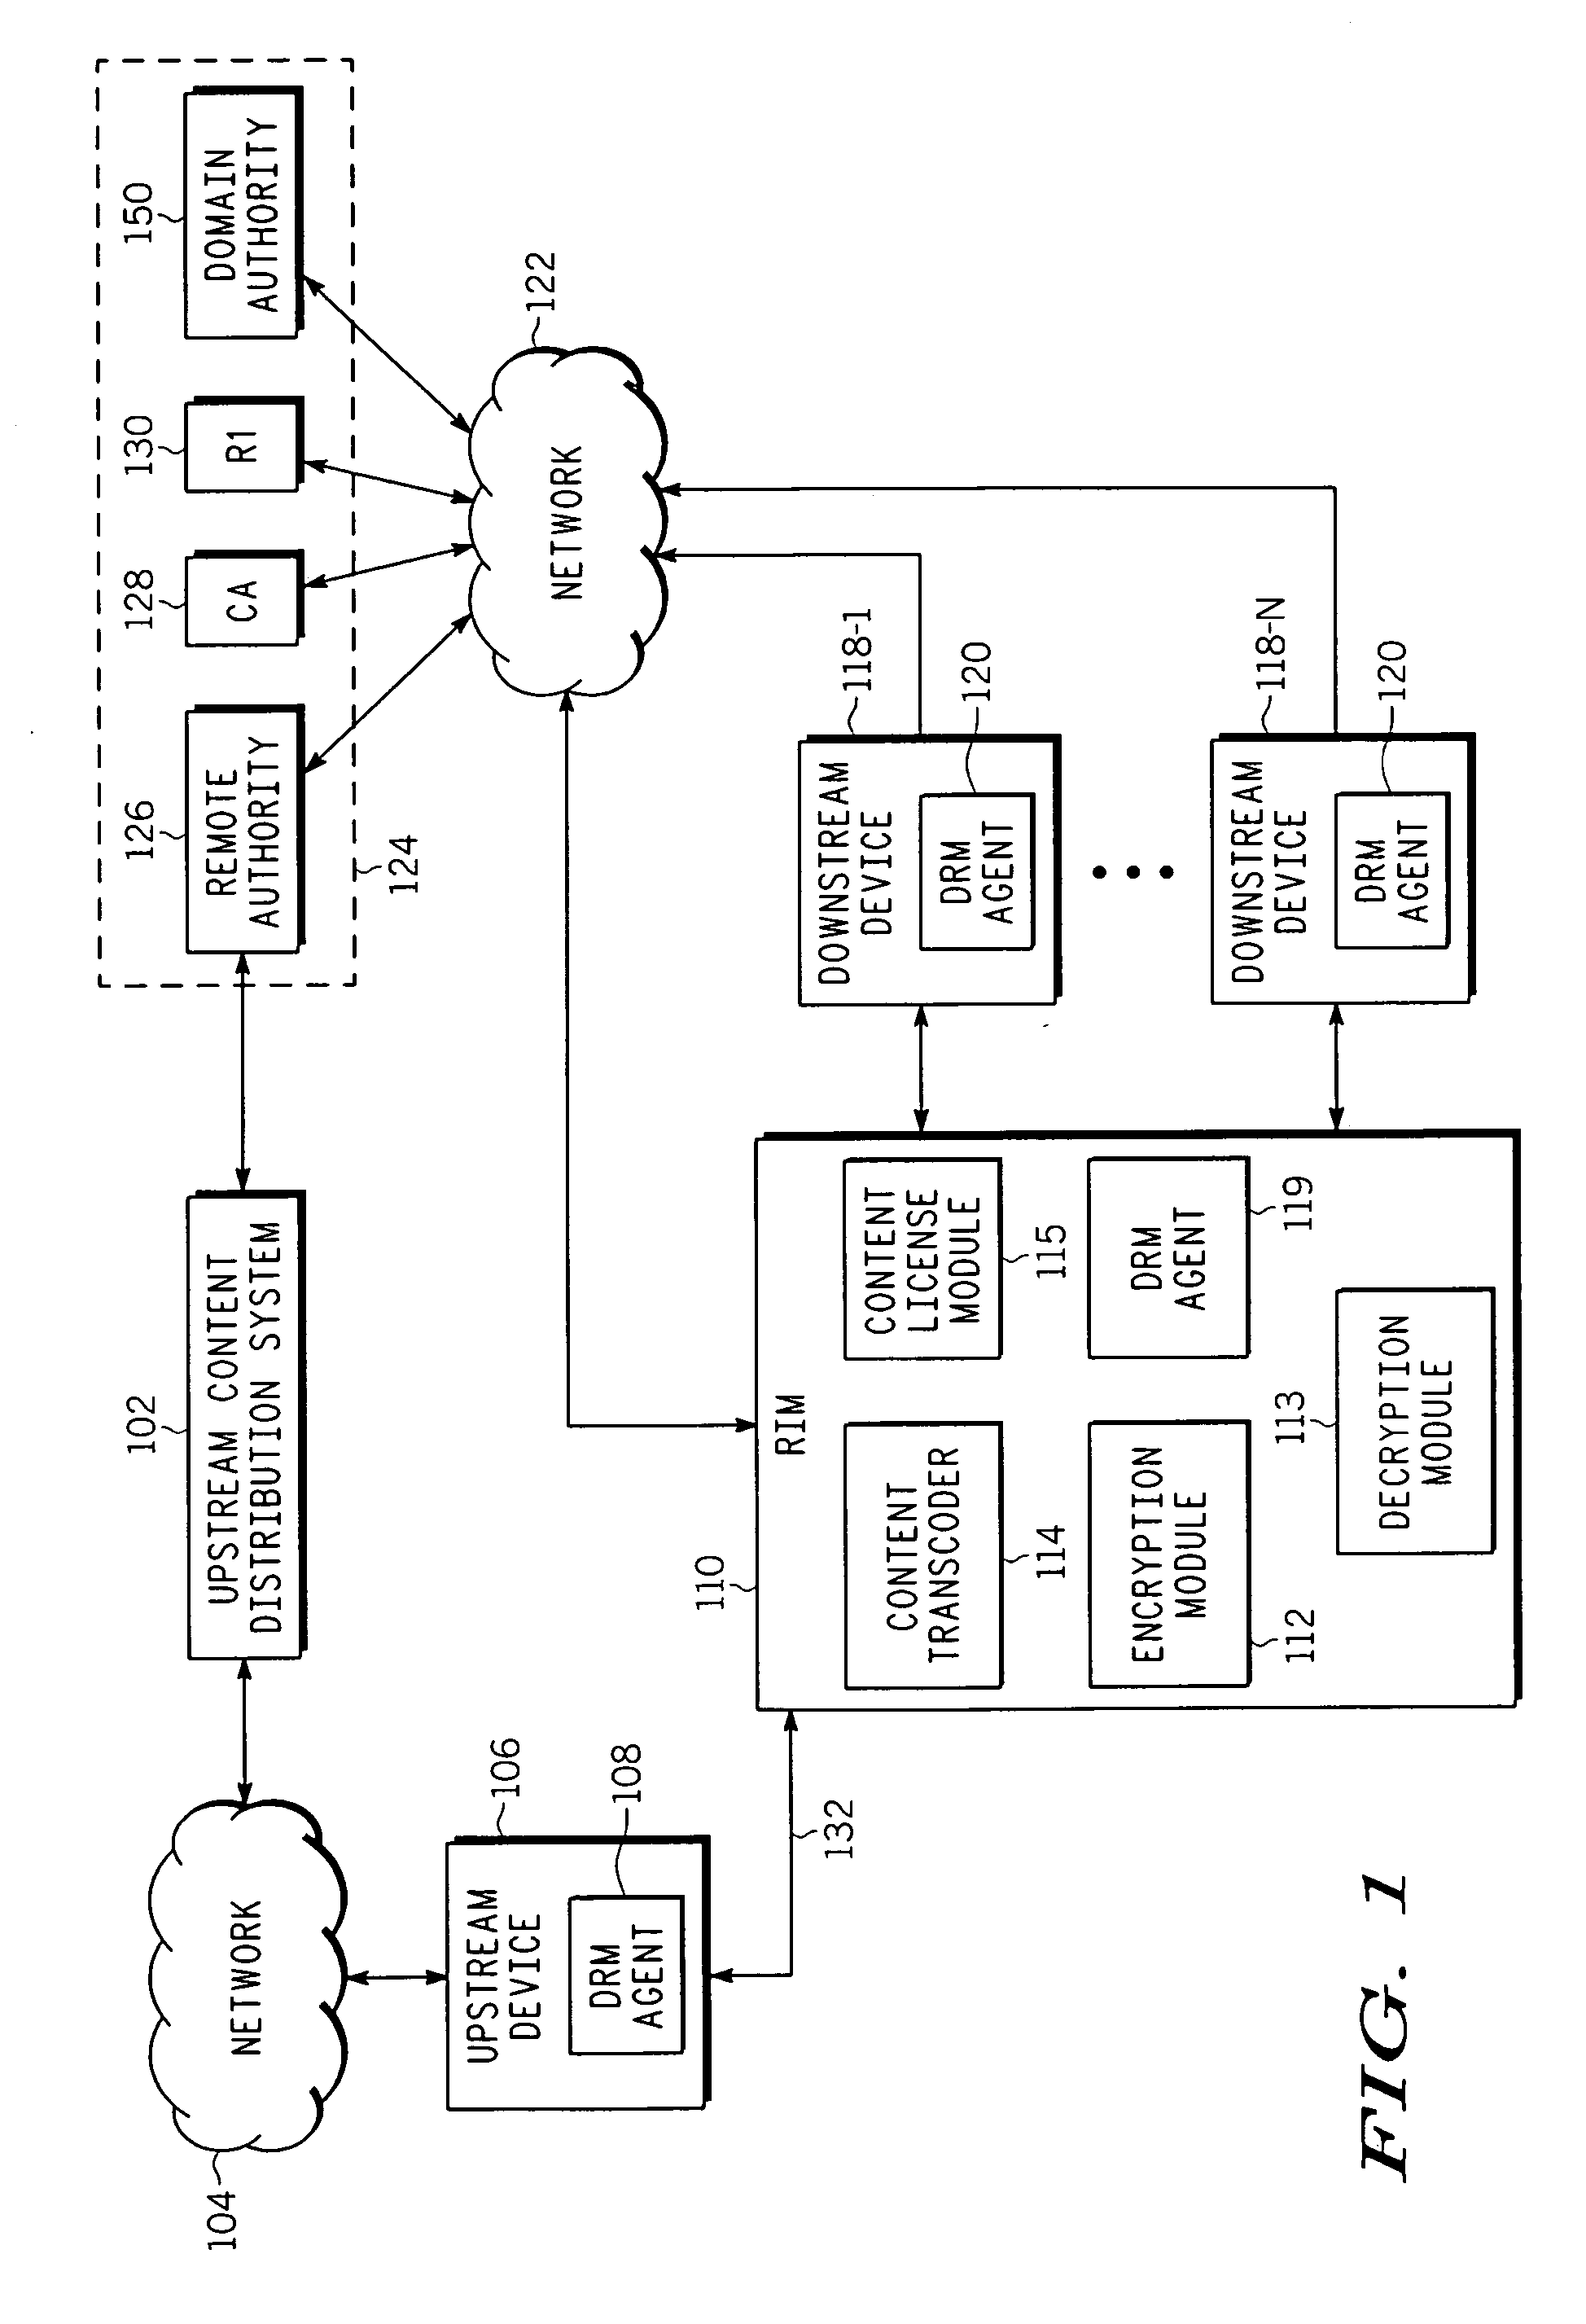 Method and apparatus for transferring protected content between digital rights management systems